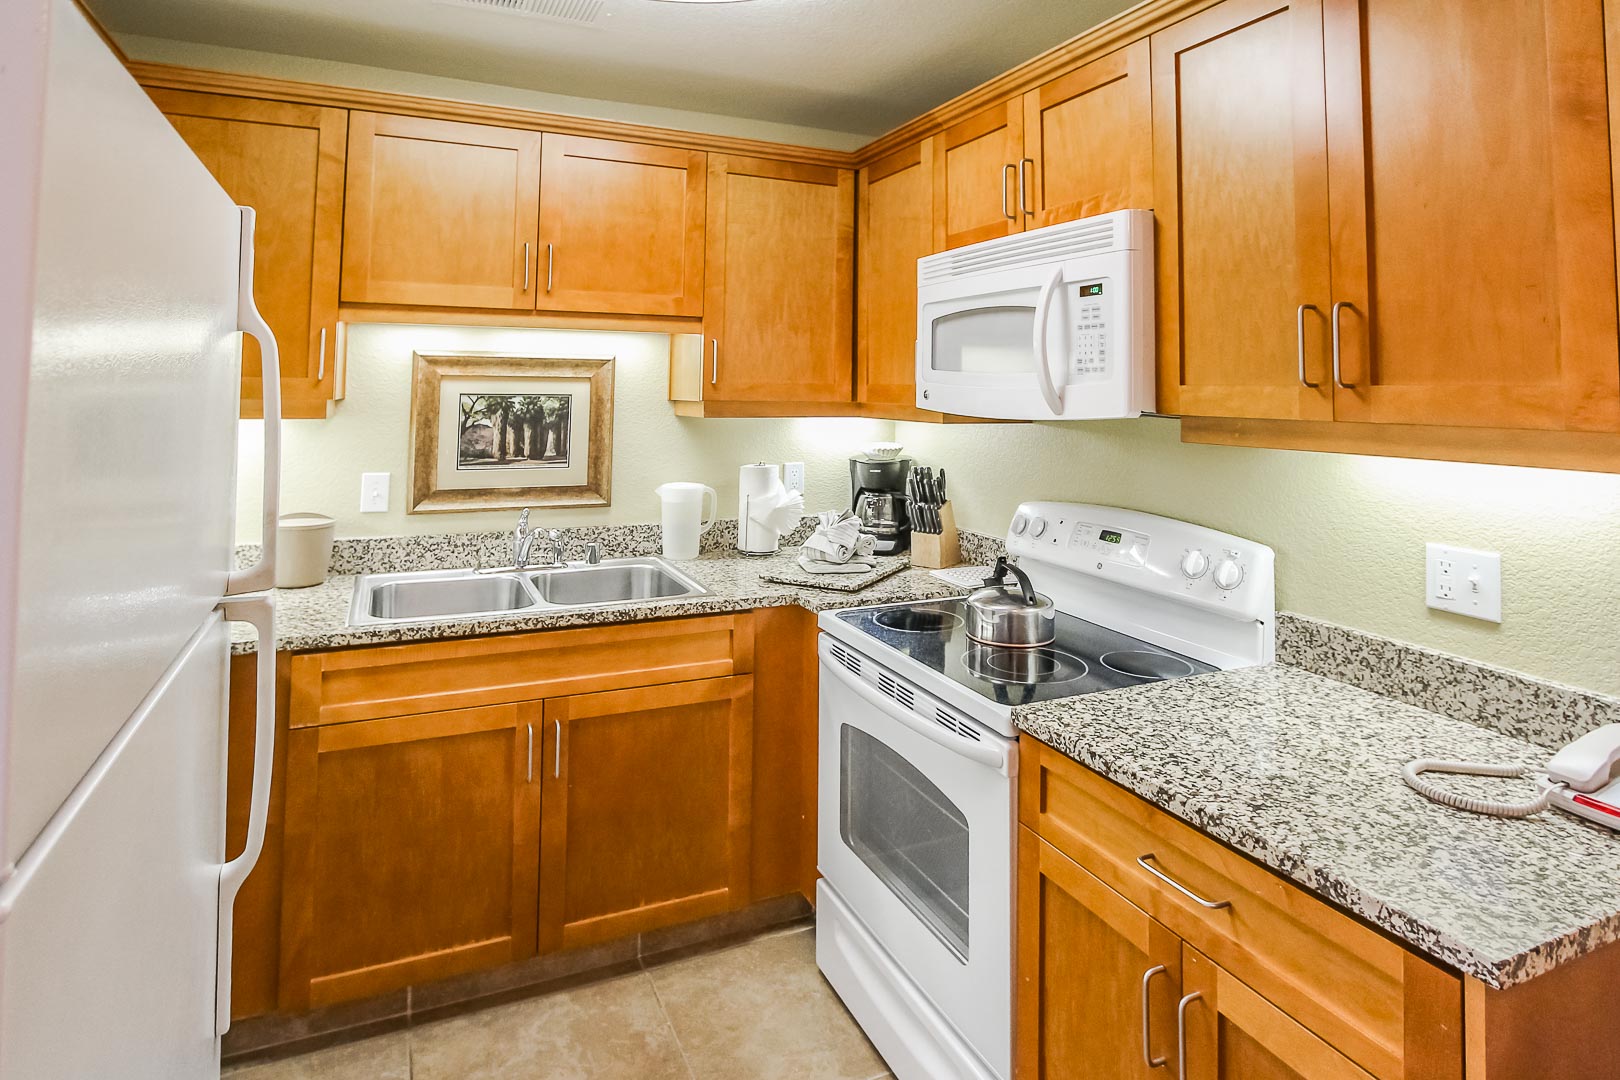 A fully equipped kitchen at VRI's Desert Vacation Villas in Palm Springs California.